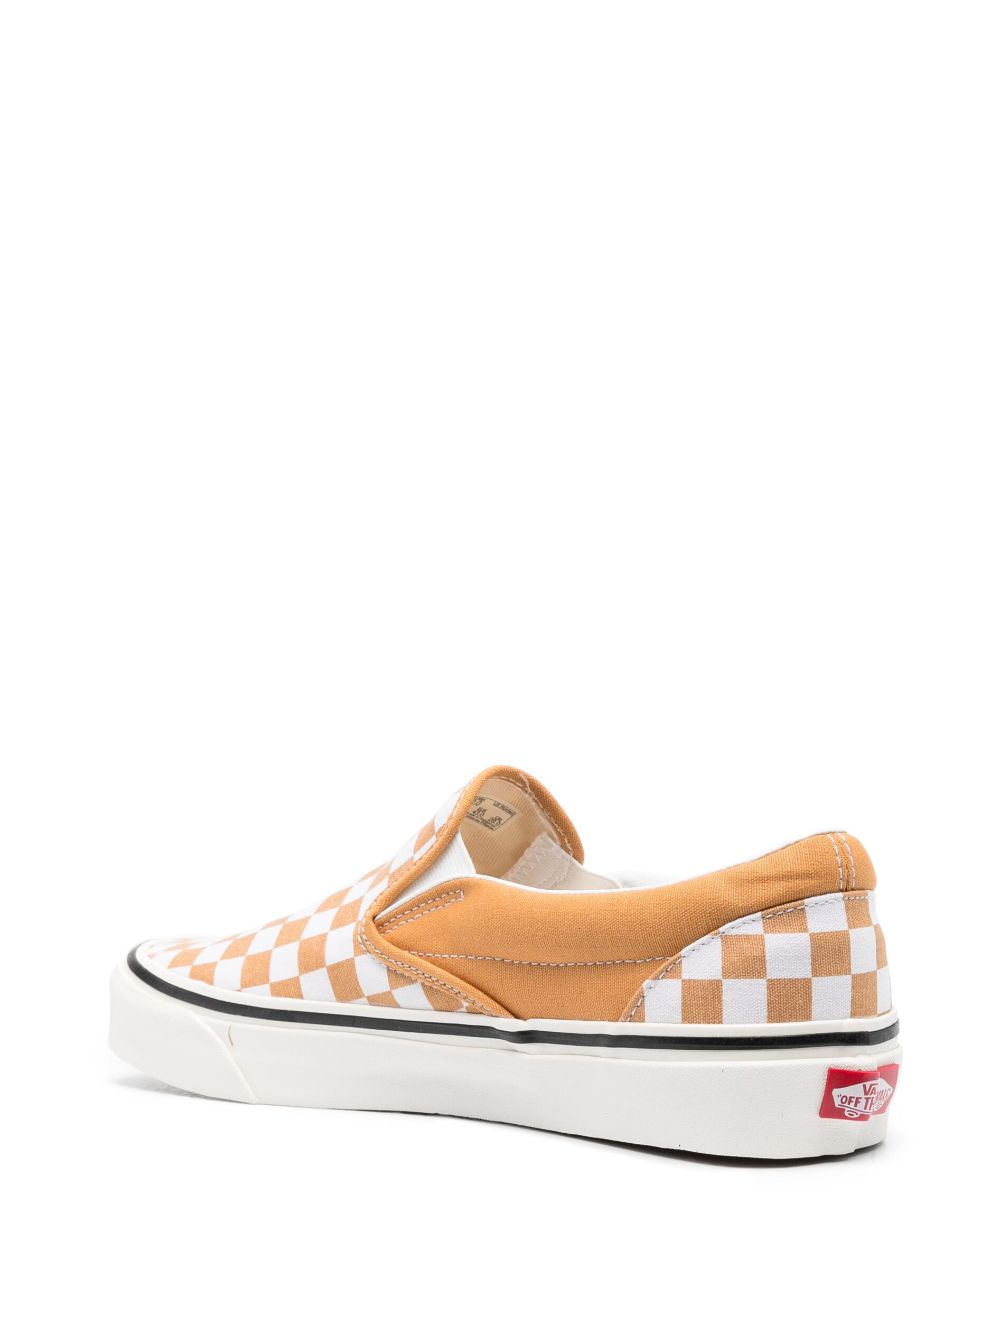 Classic checked slip-on sneakers